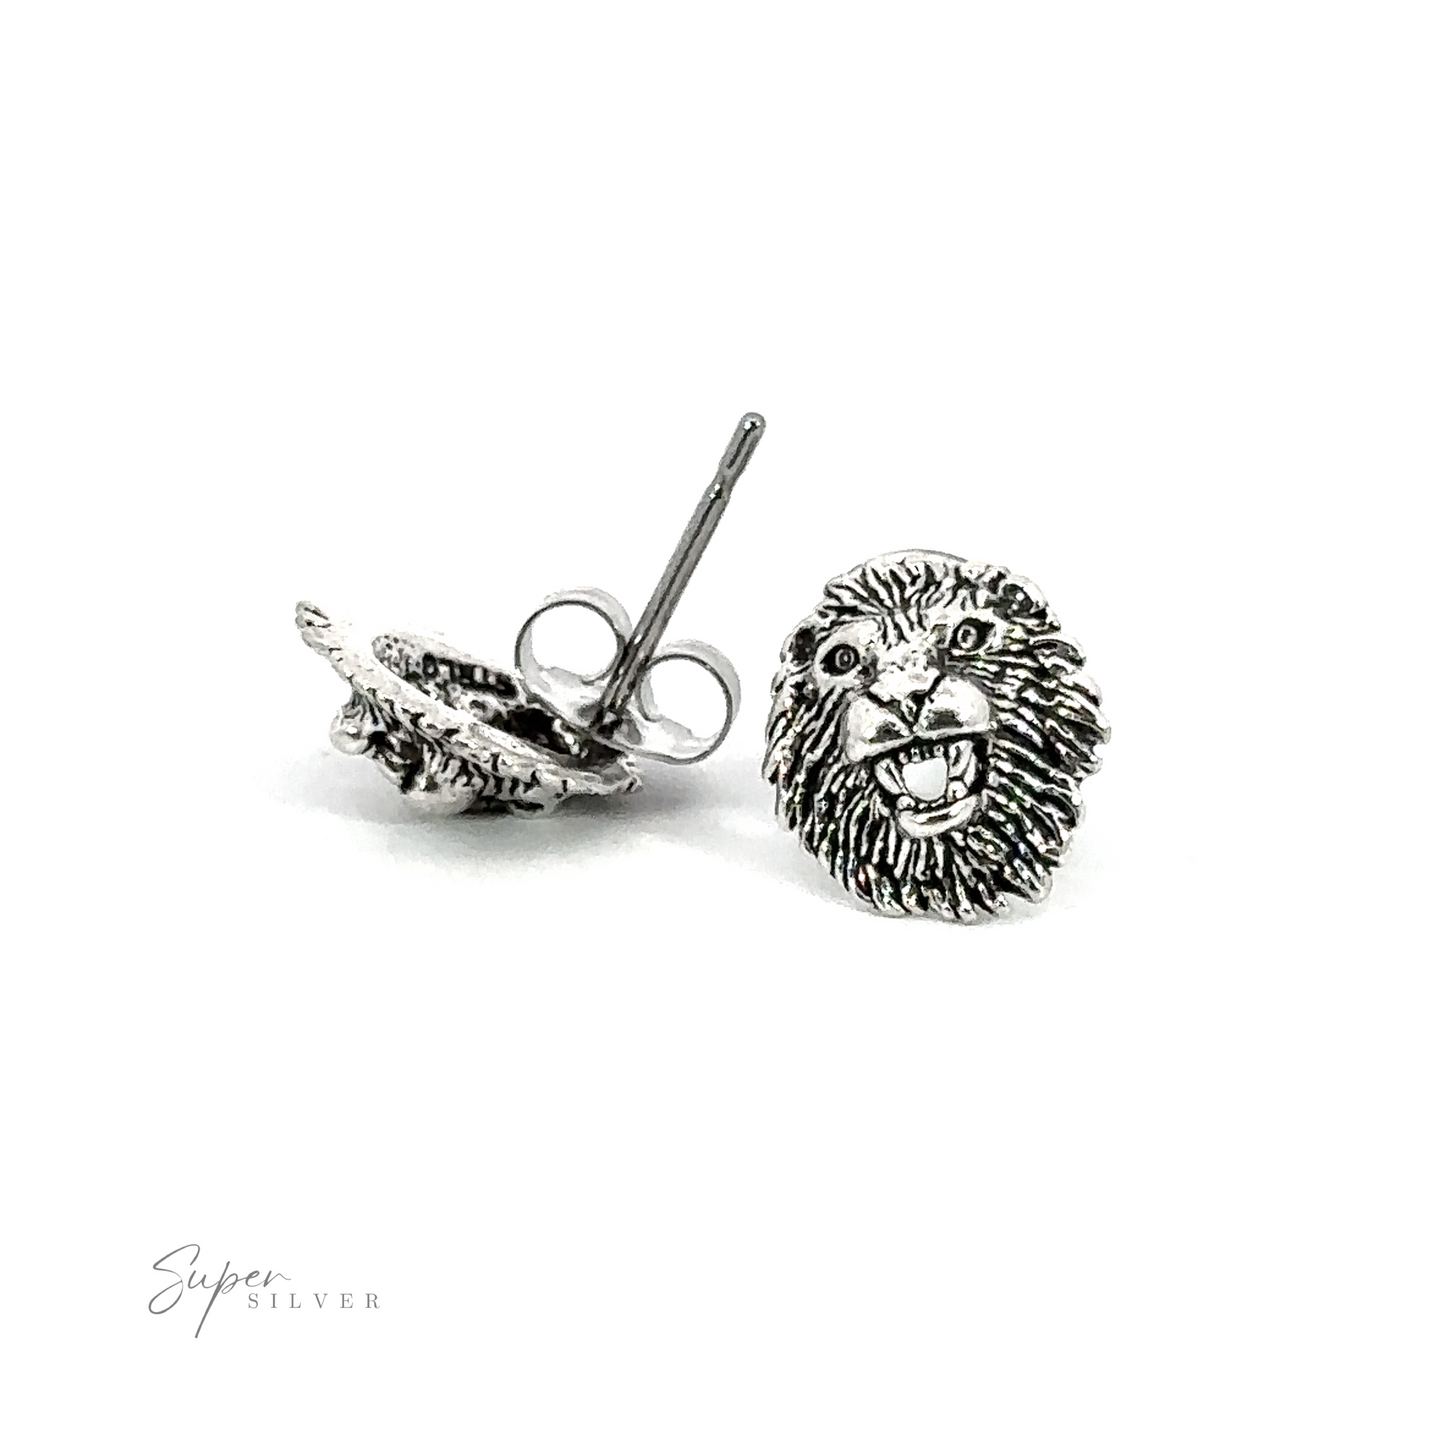 A pair of Lion Head Studs made of .925 Sterling Silver on a white background.